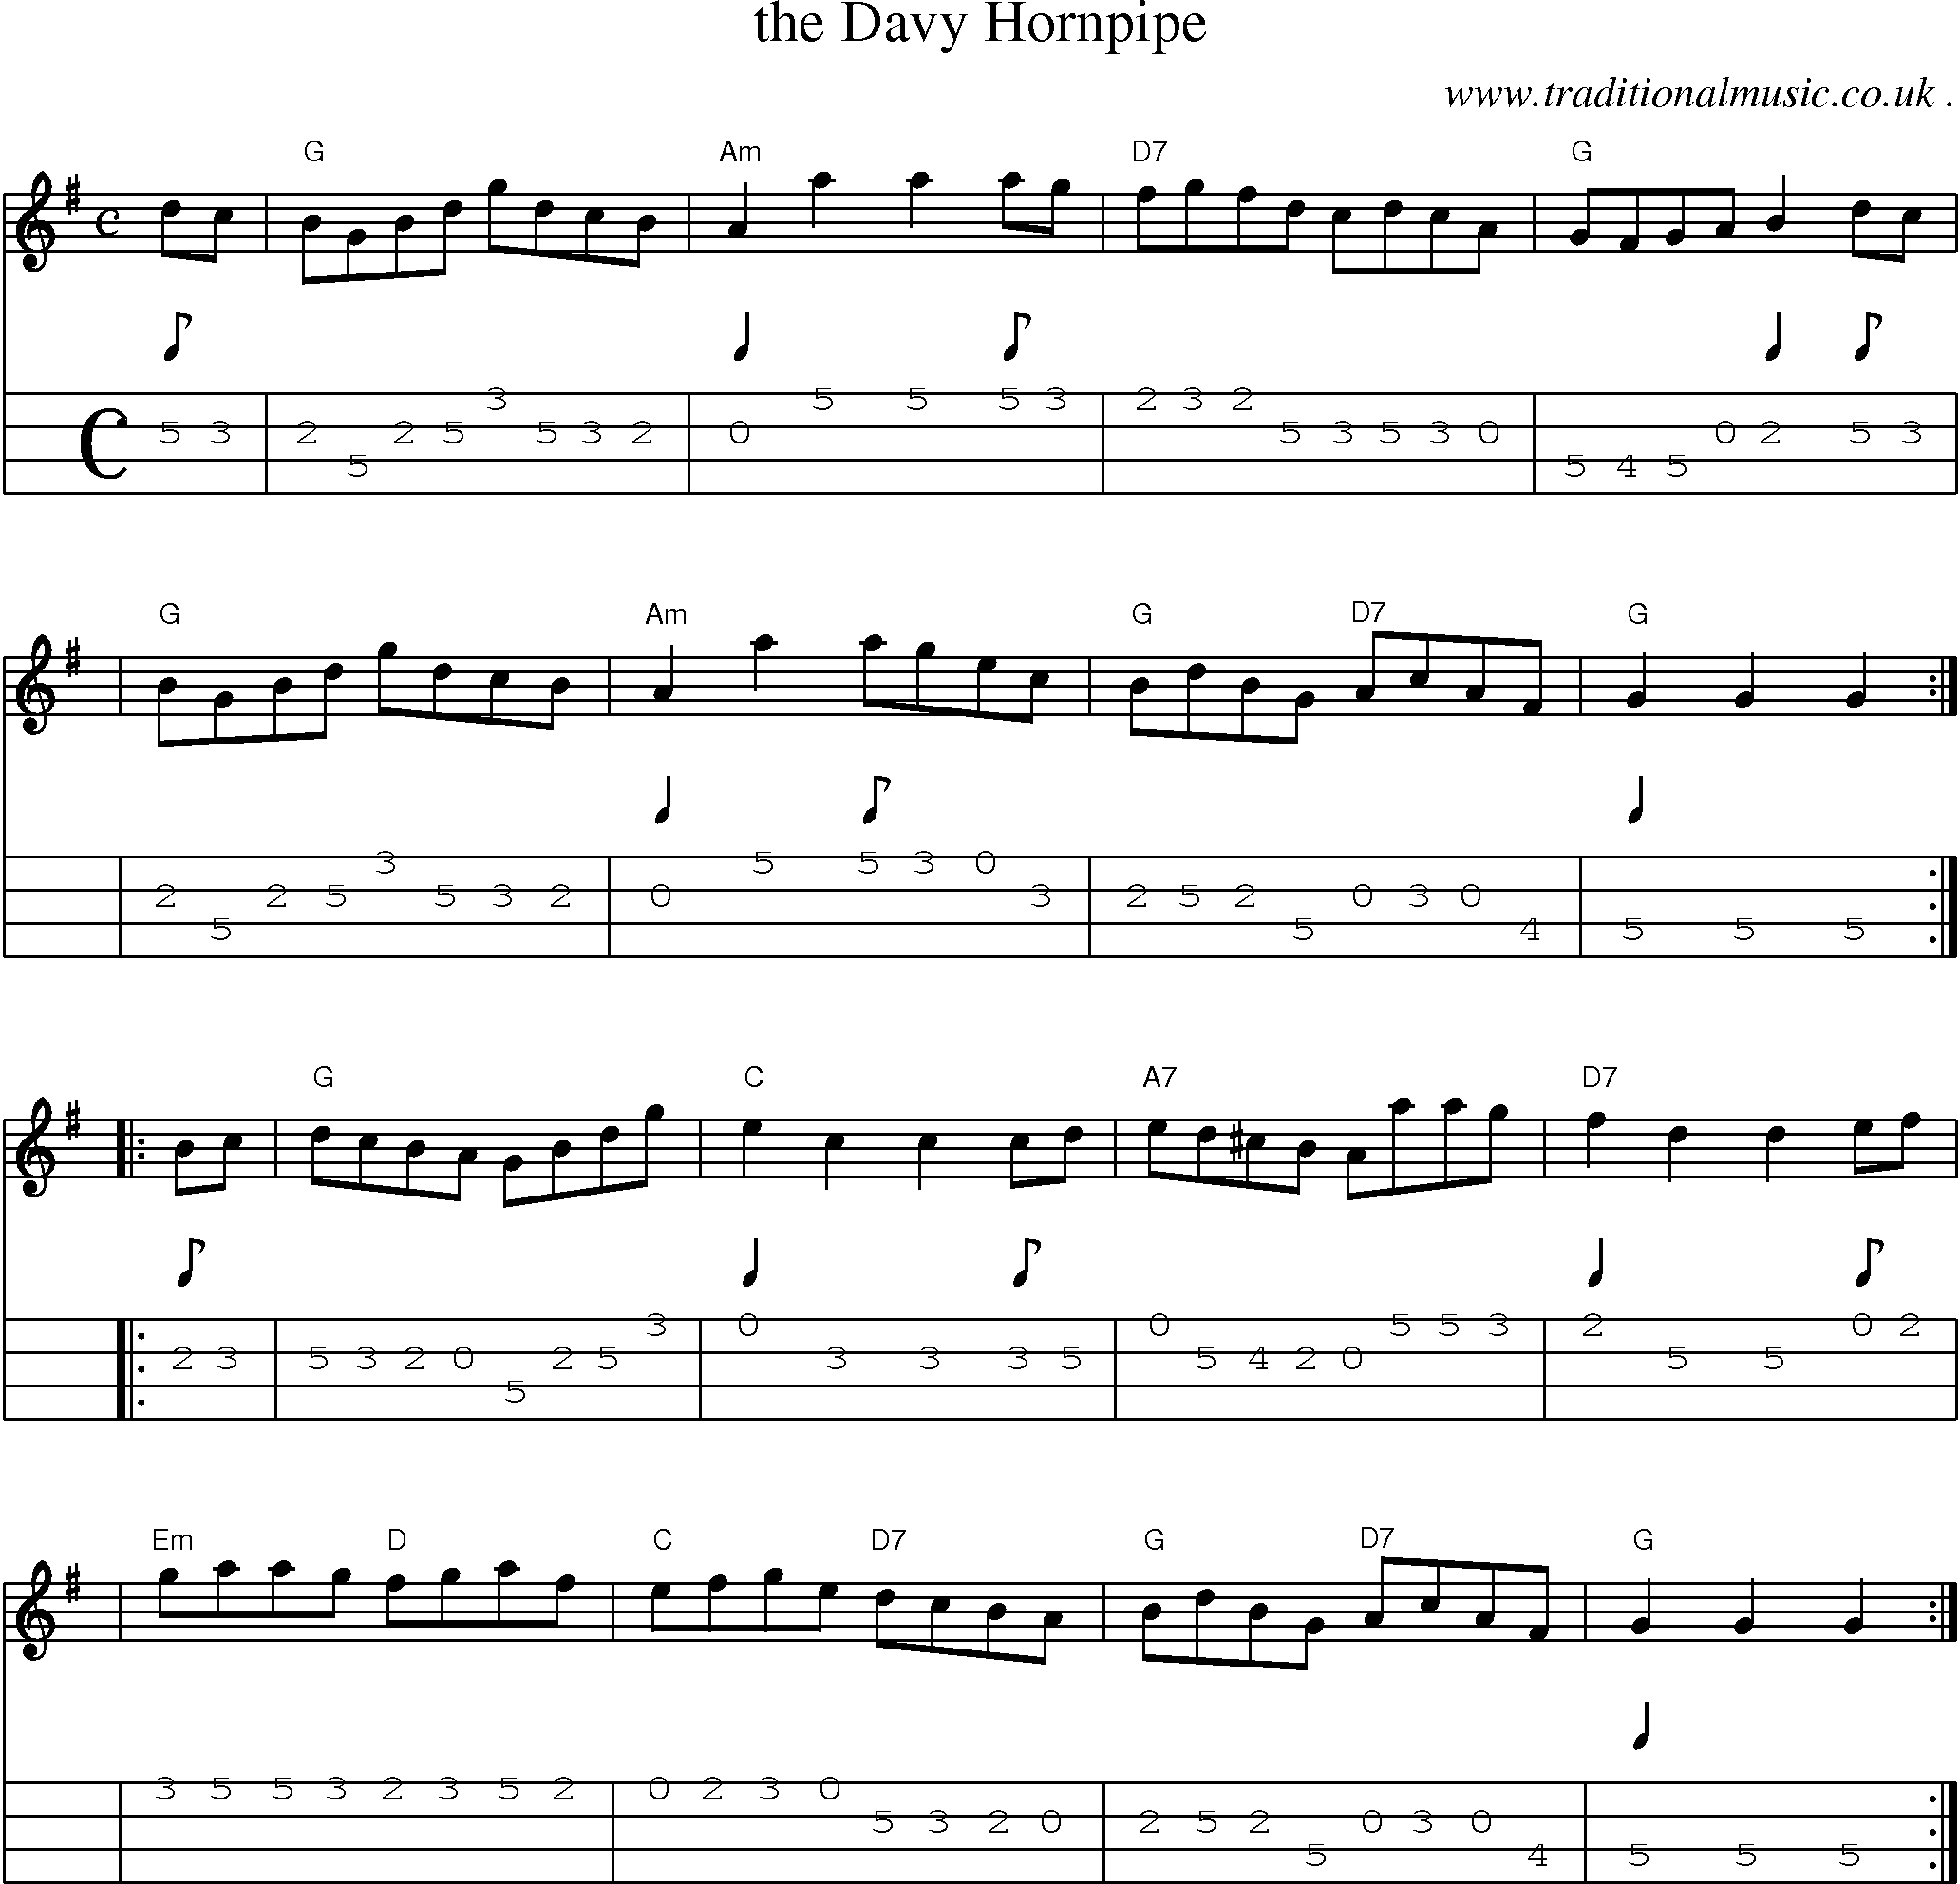 Sheet-music  score, Chords and Mandolin Tabs for The Davy Hornpipe